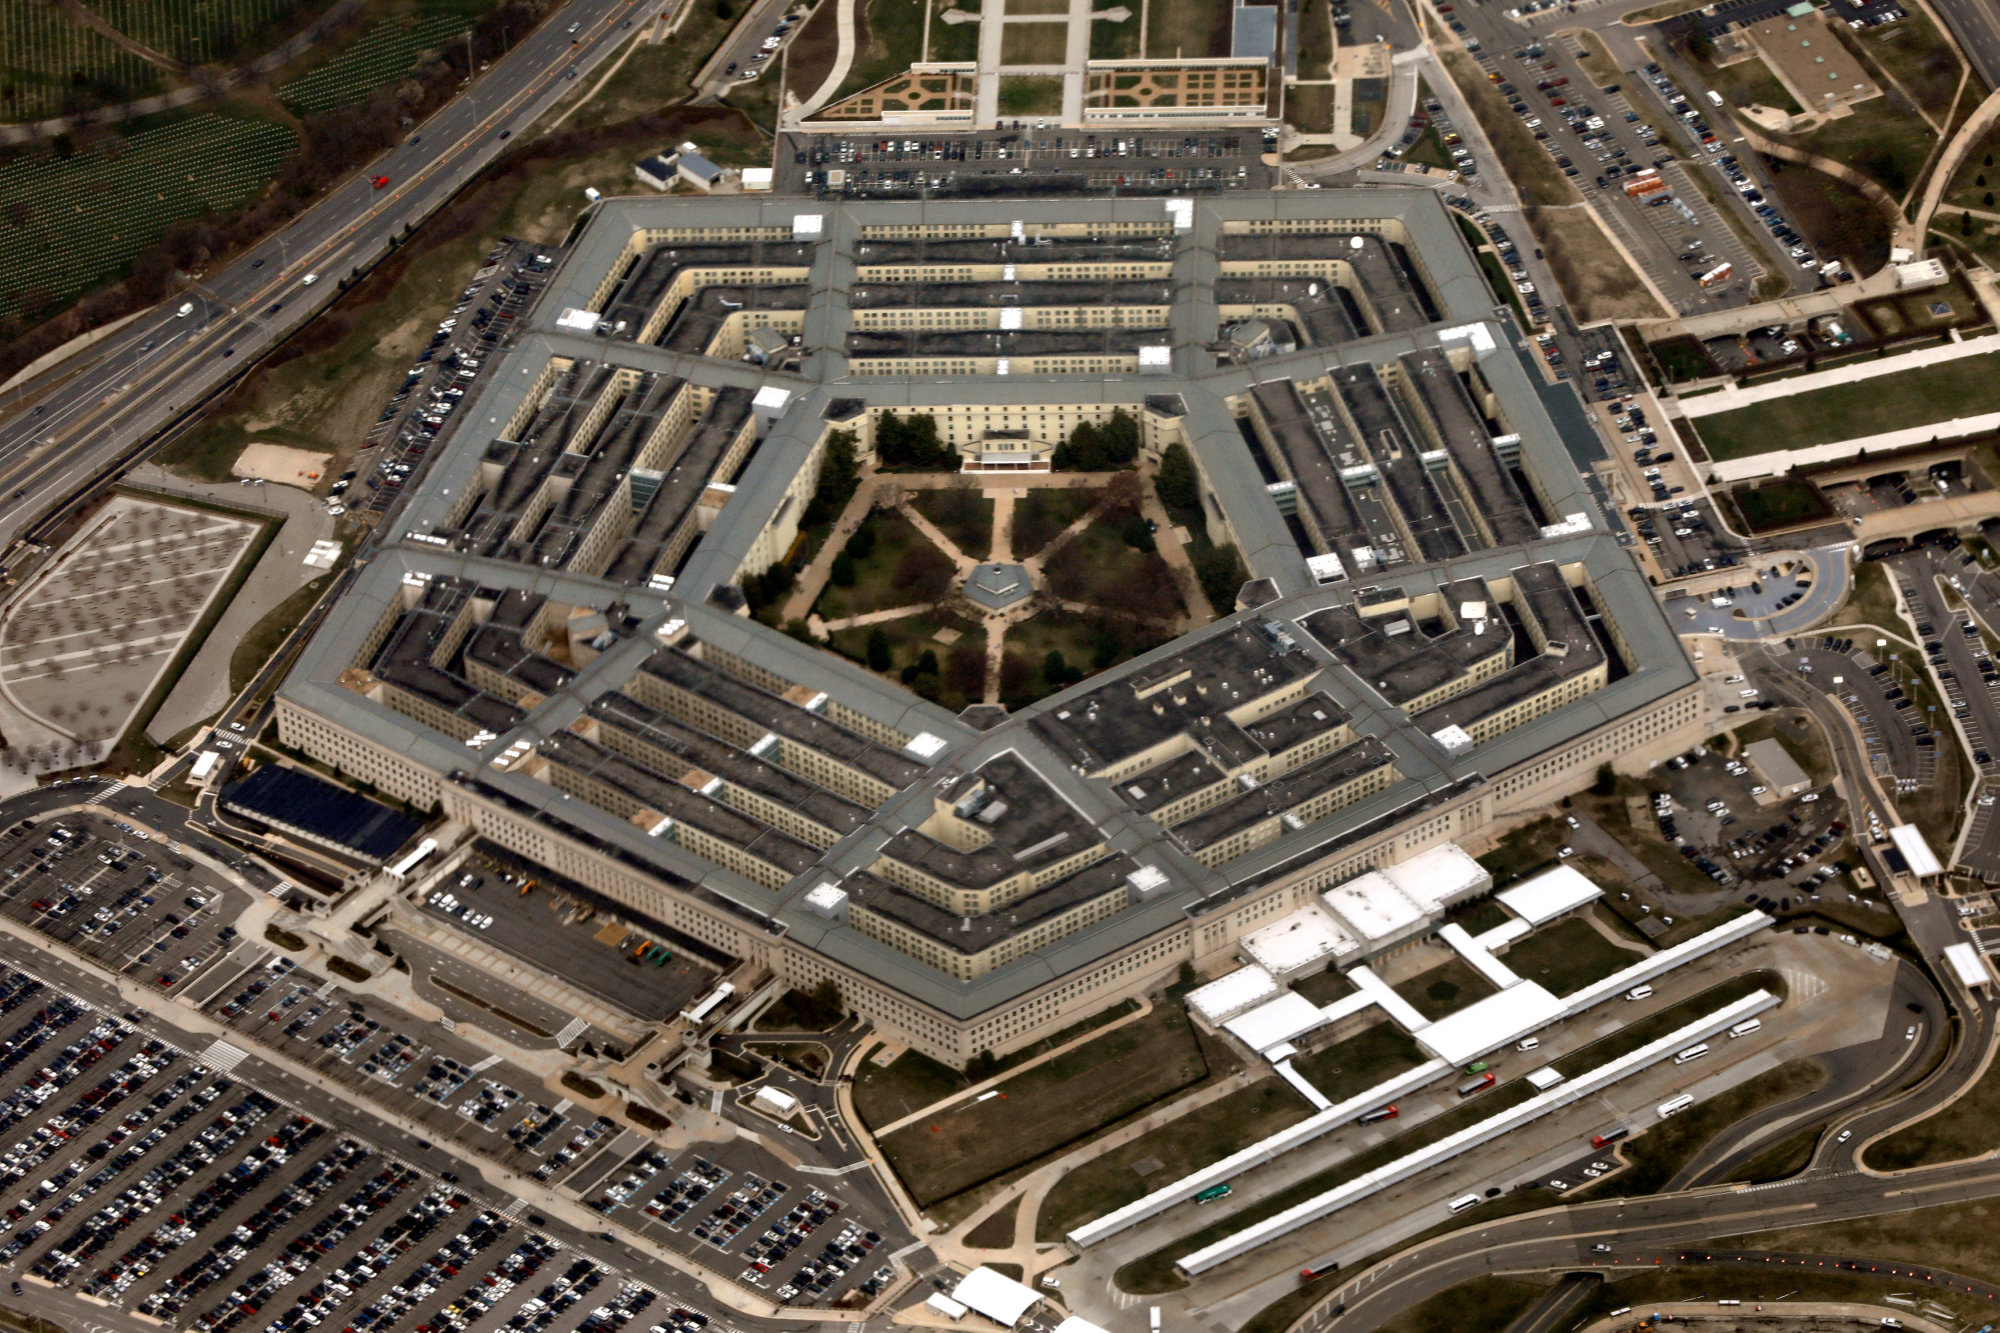 A new Pentagon report says 'China represents a significant and growing risk to the supply of materials and technologies deemed strategic and critical to U.S. national security.' | REUTERS